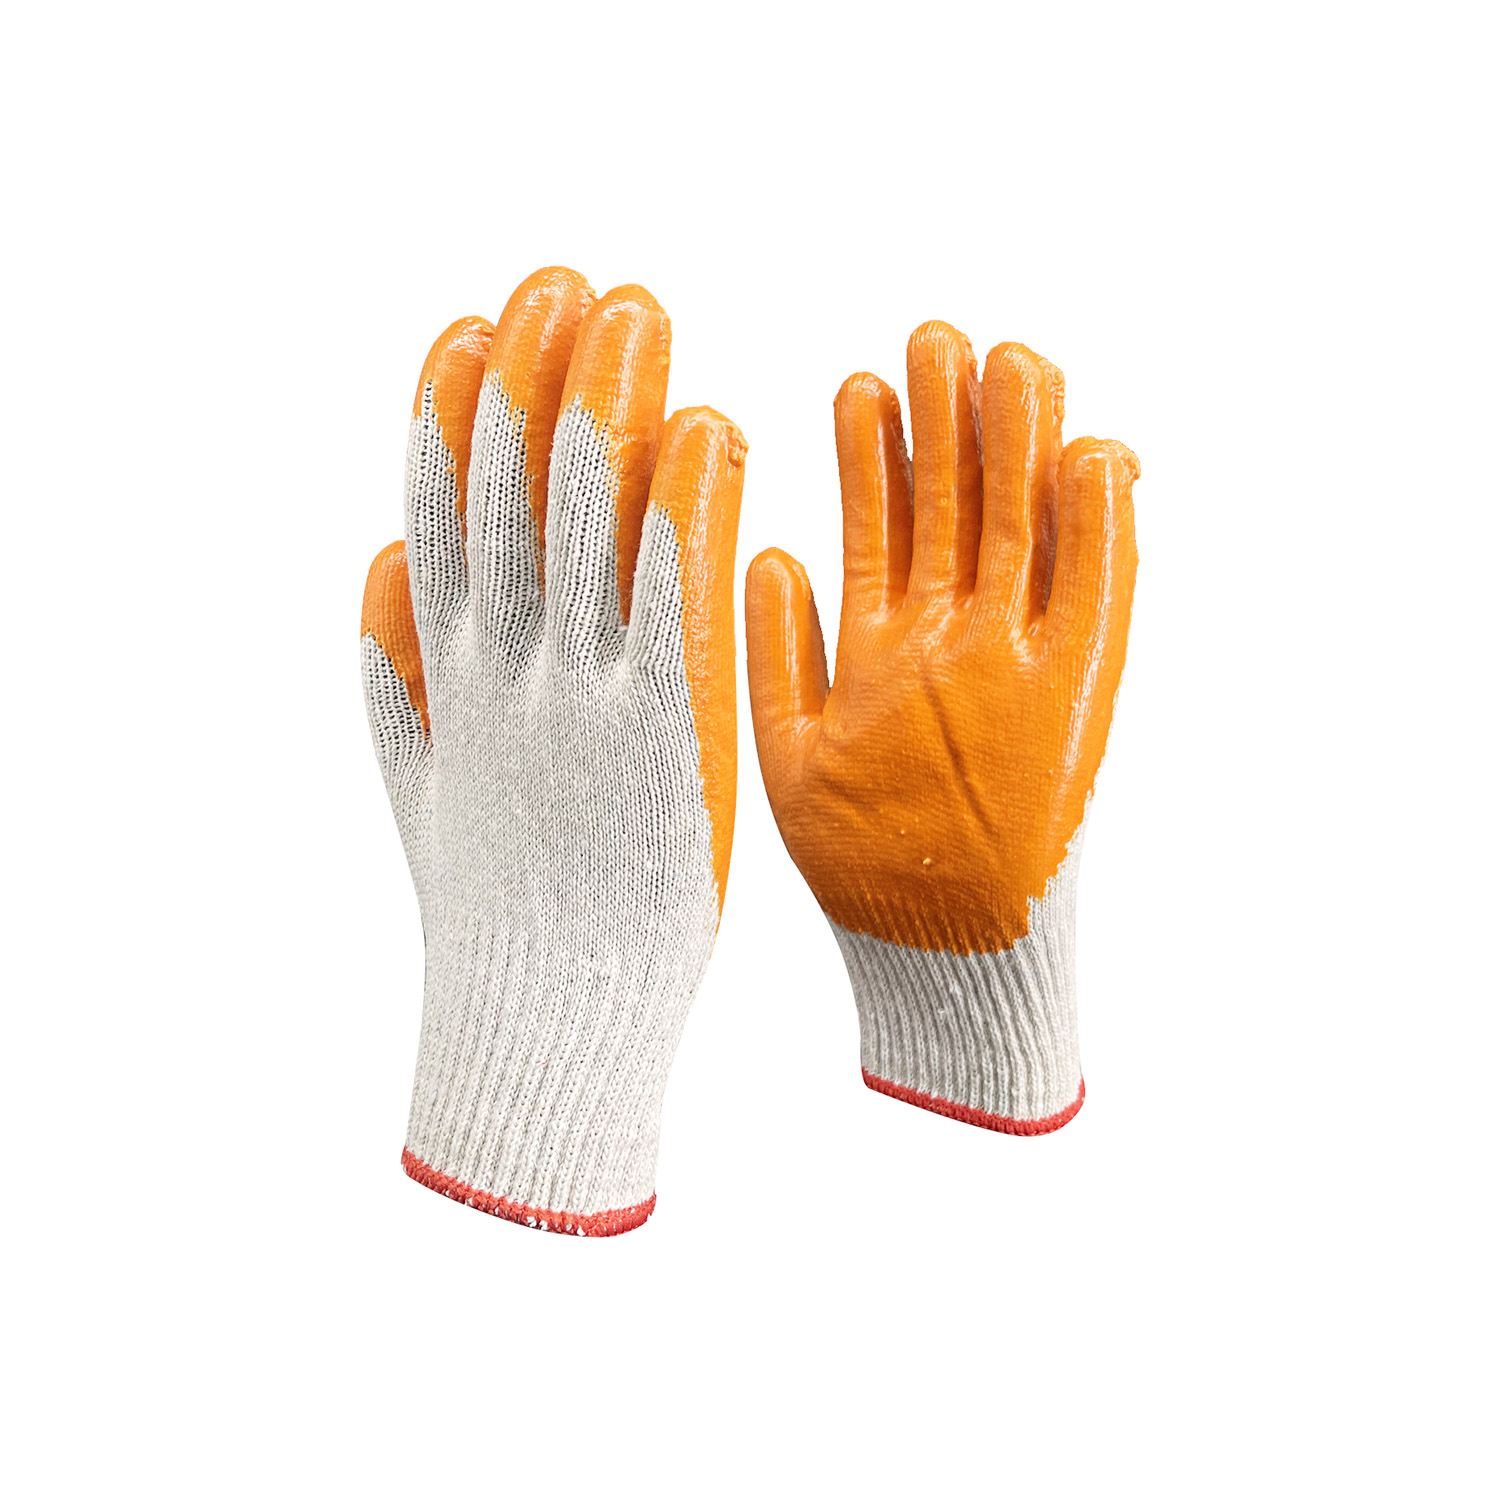 China Wholesale 30-80g/Pairs Latex Coated Guantes Knitted Cotton Hand Safety Work Gloves